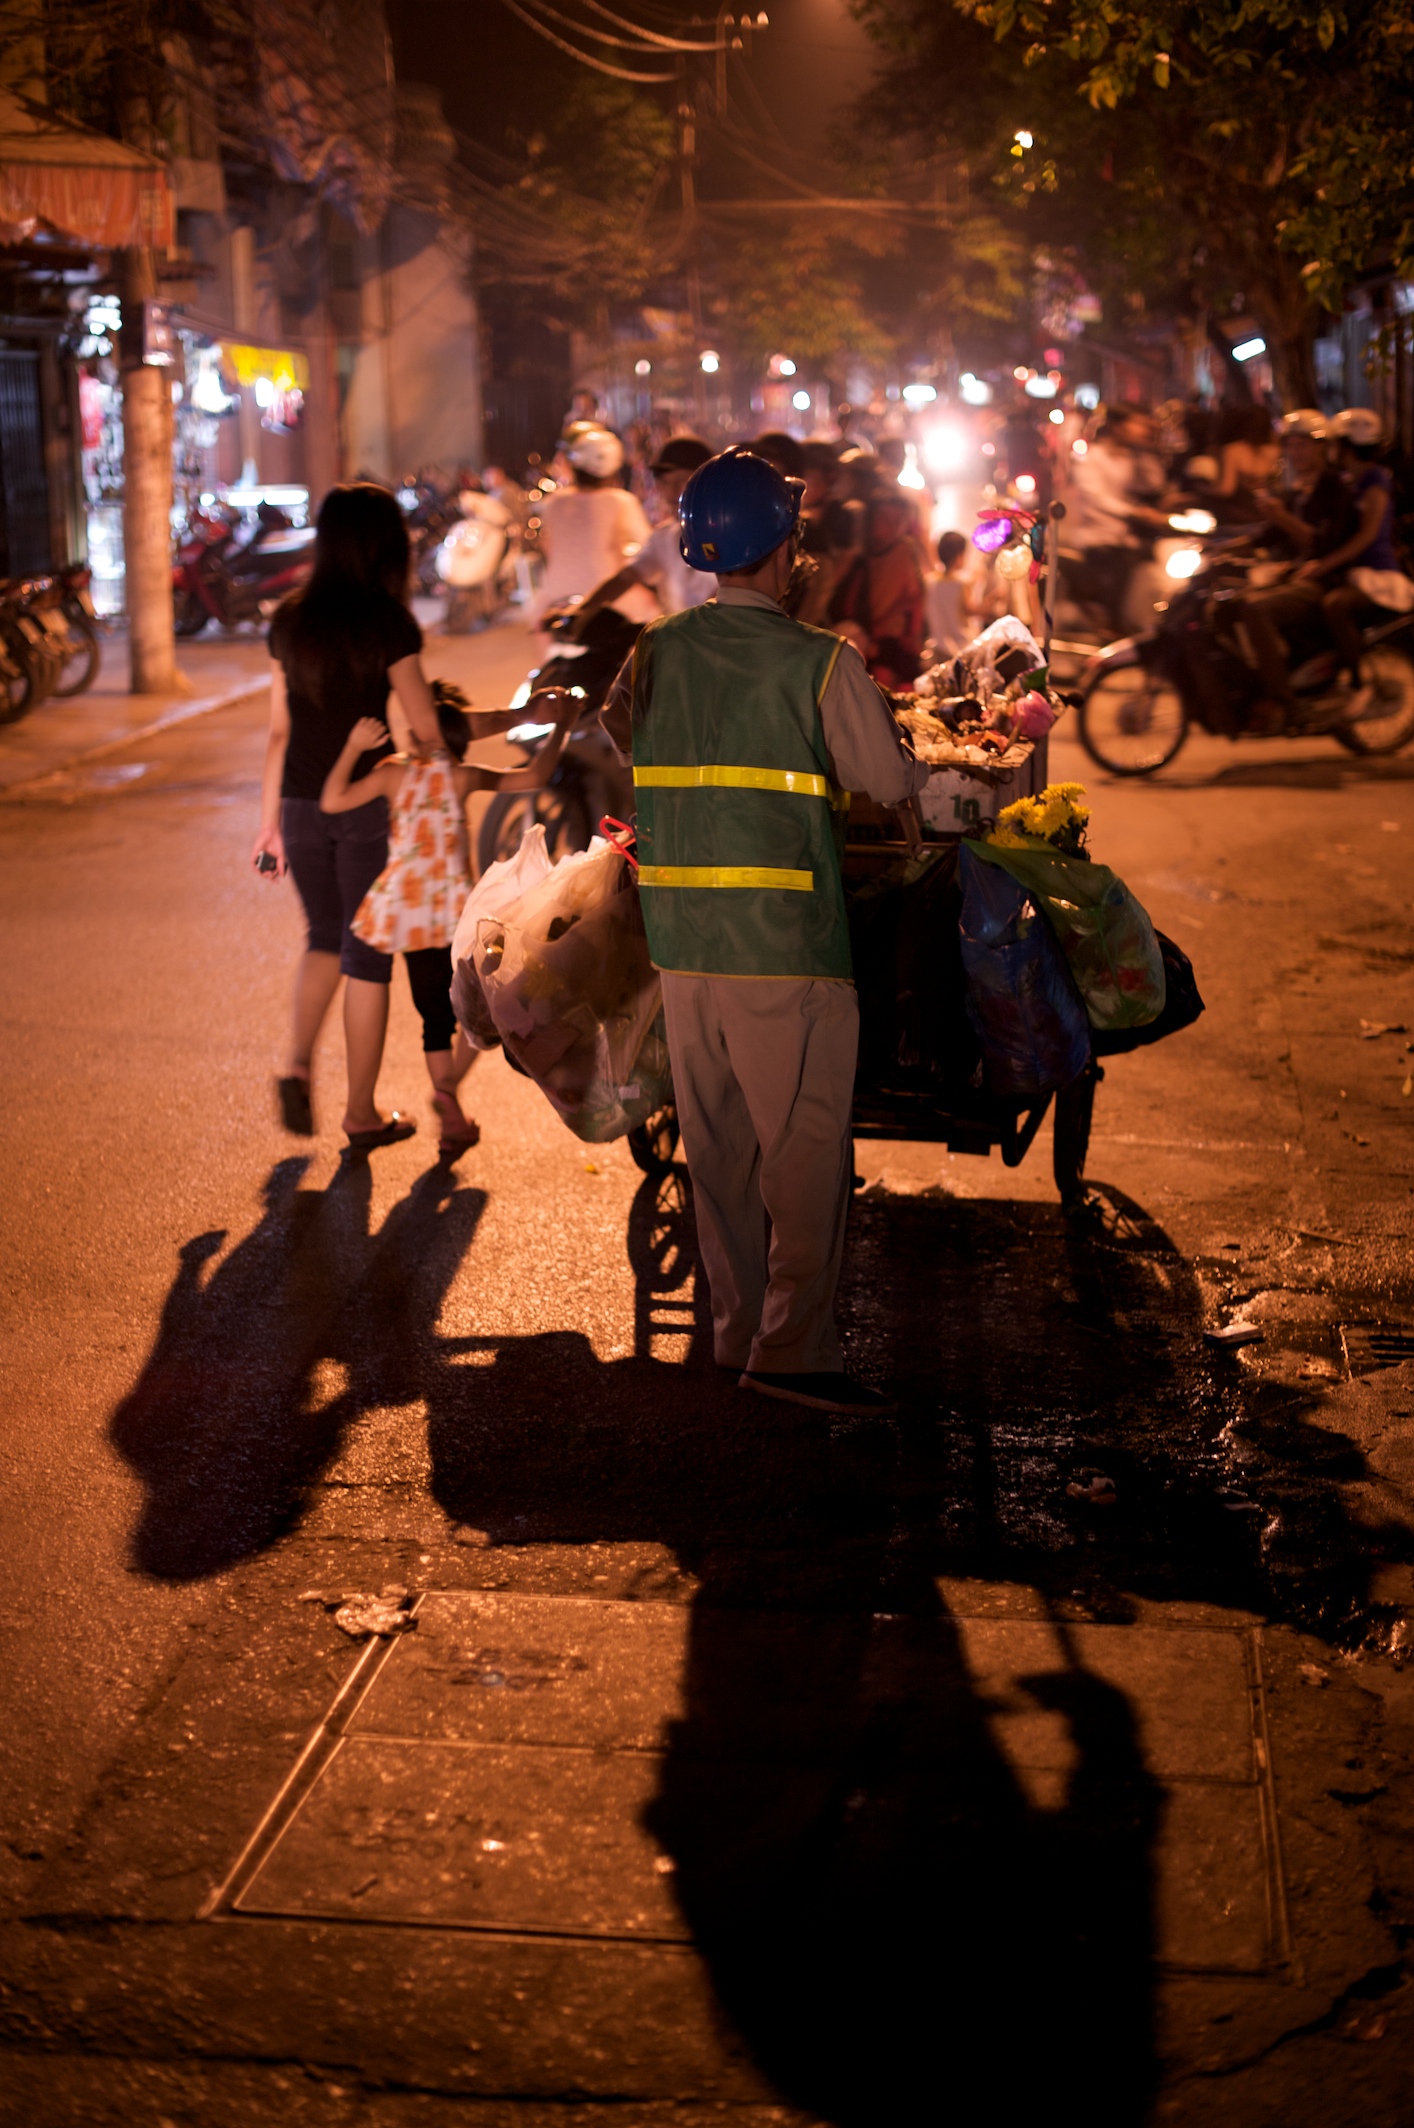 Garbage collection at night